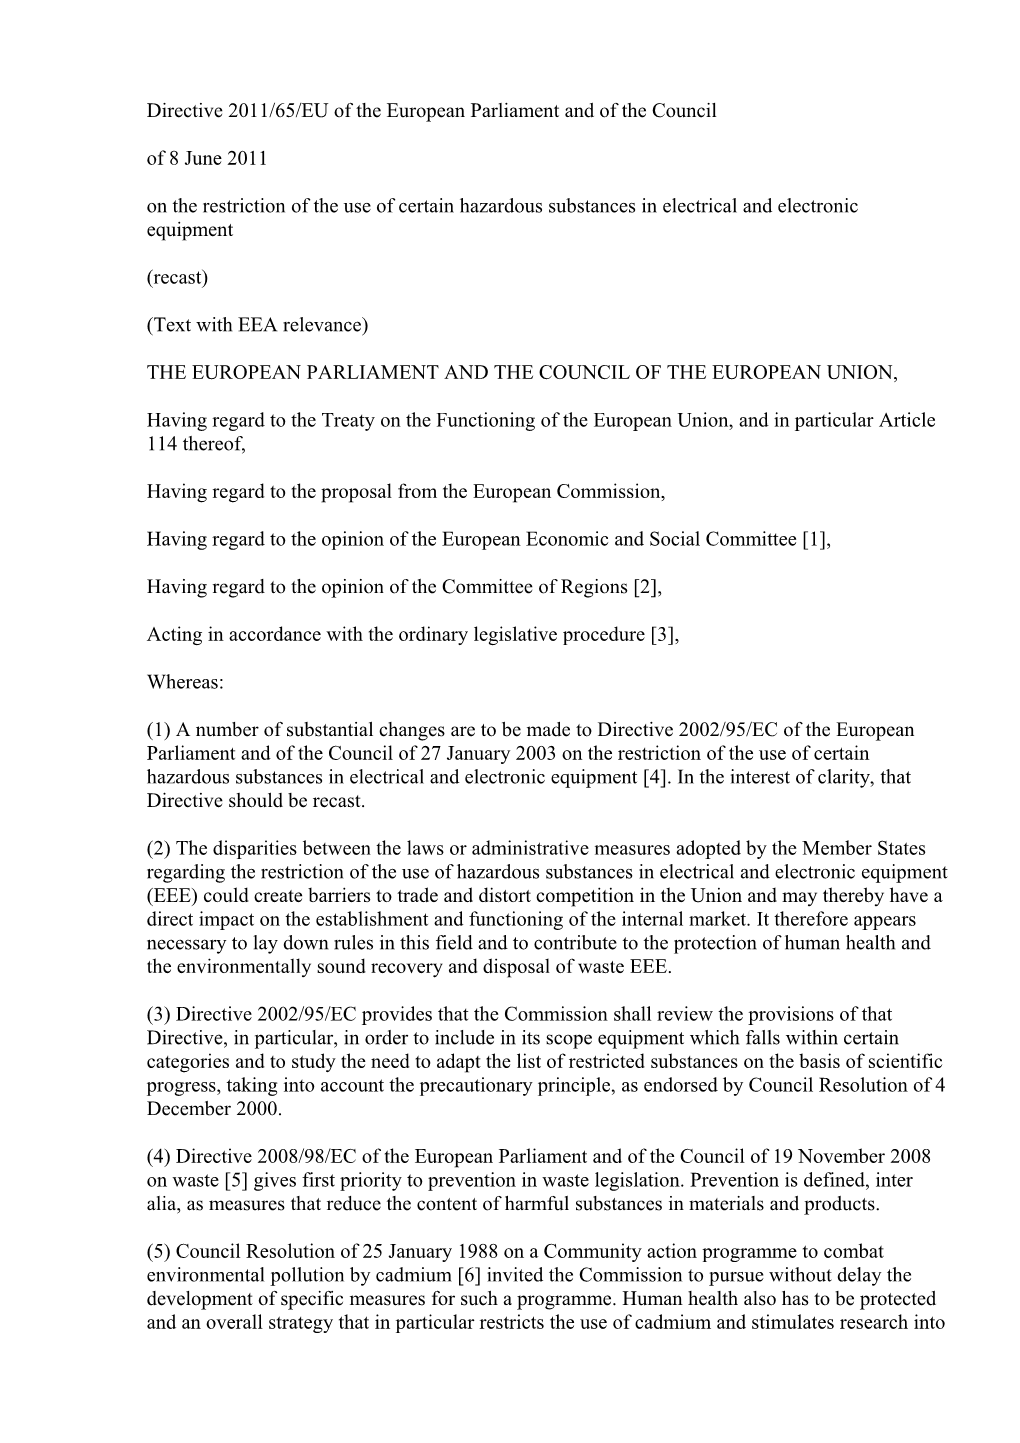 Directive 2011/65/EU Of The European Parliament And Of The Council